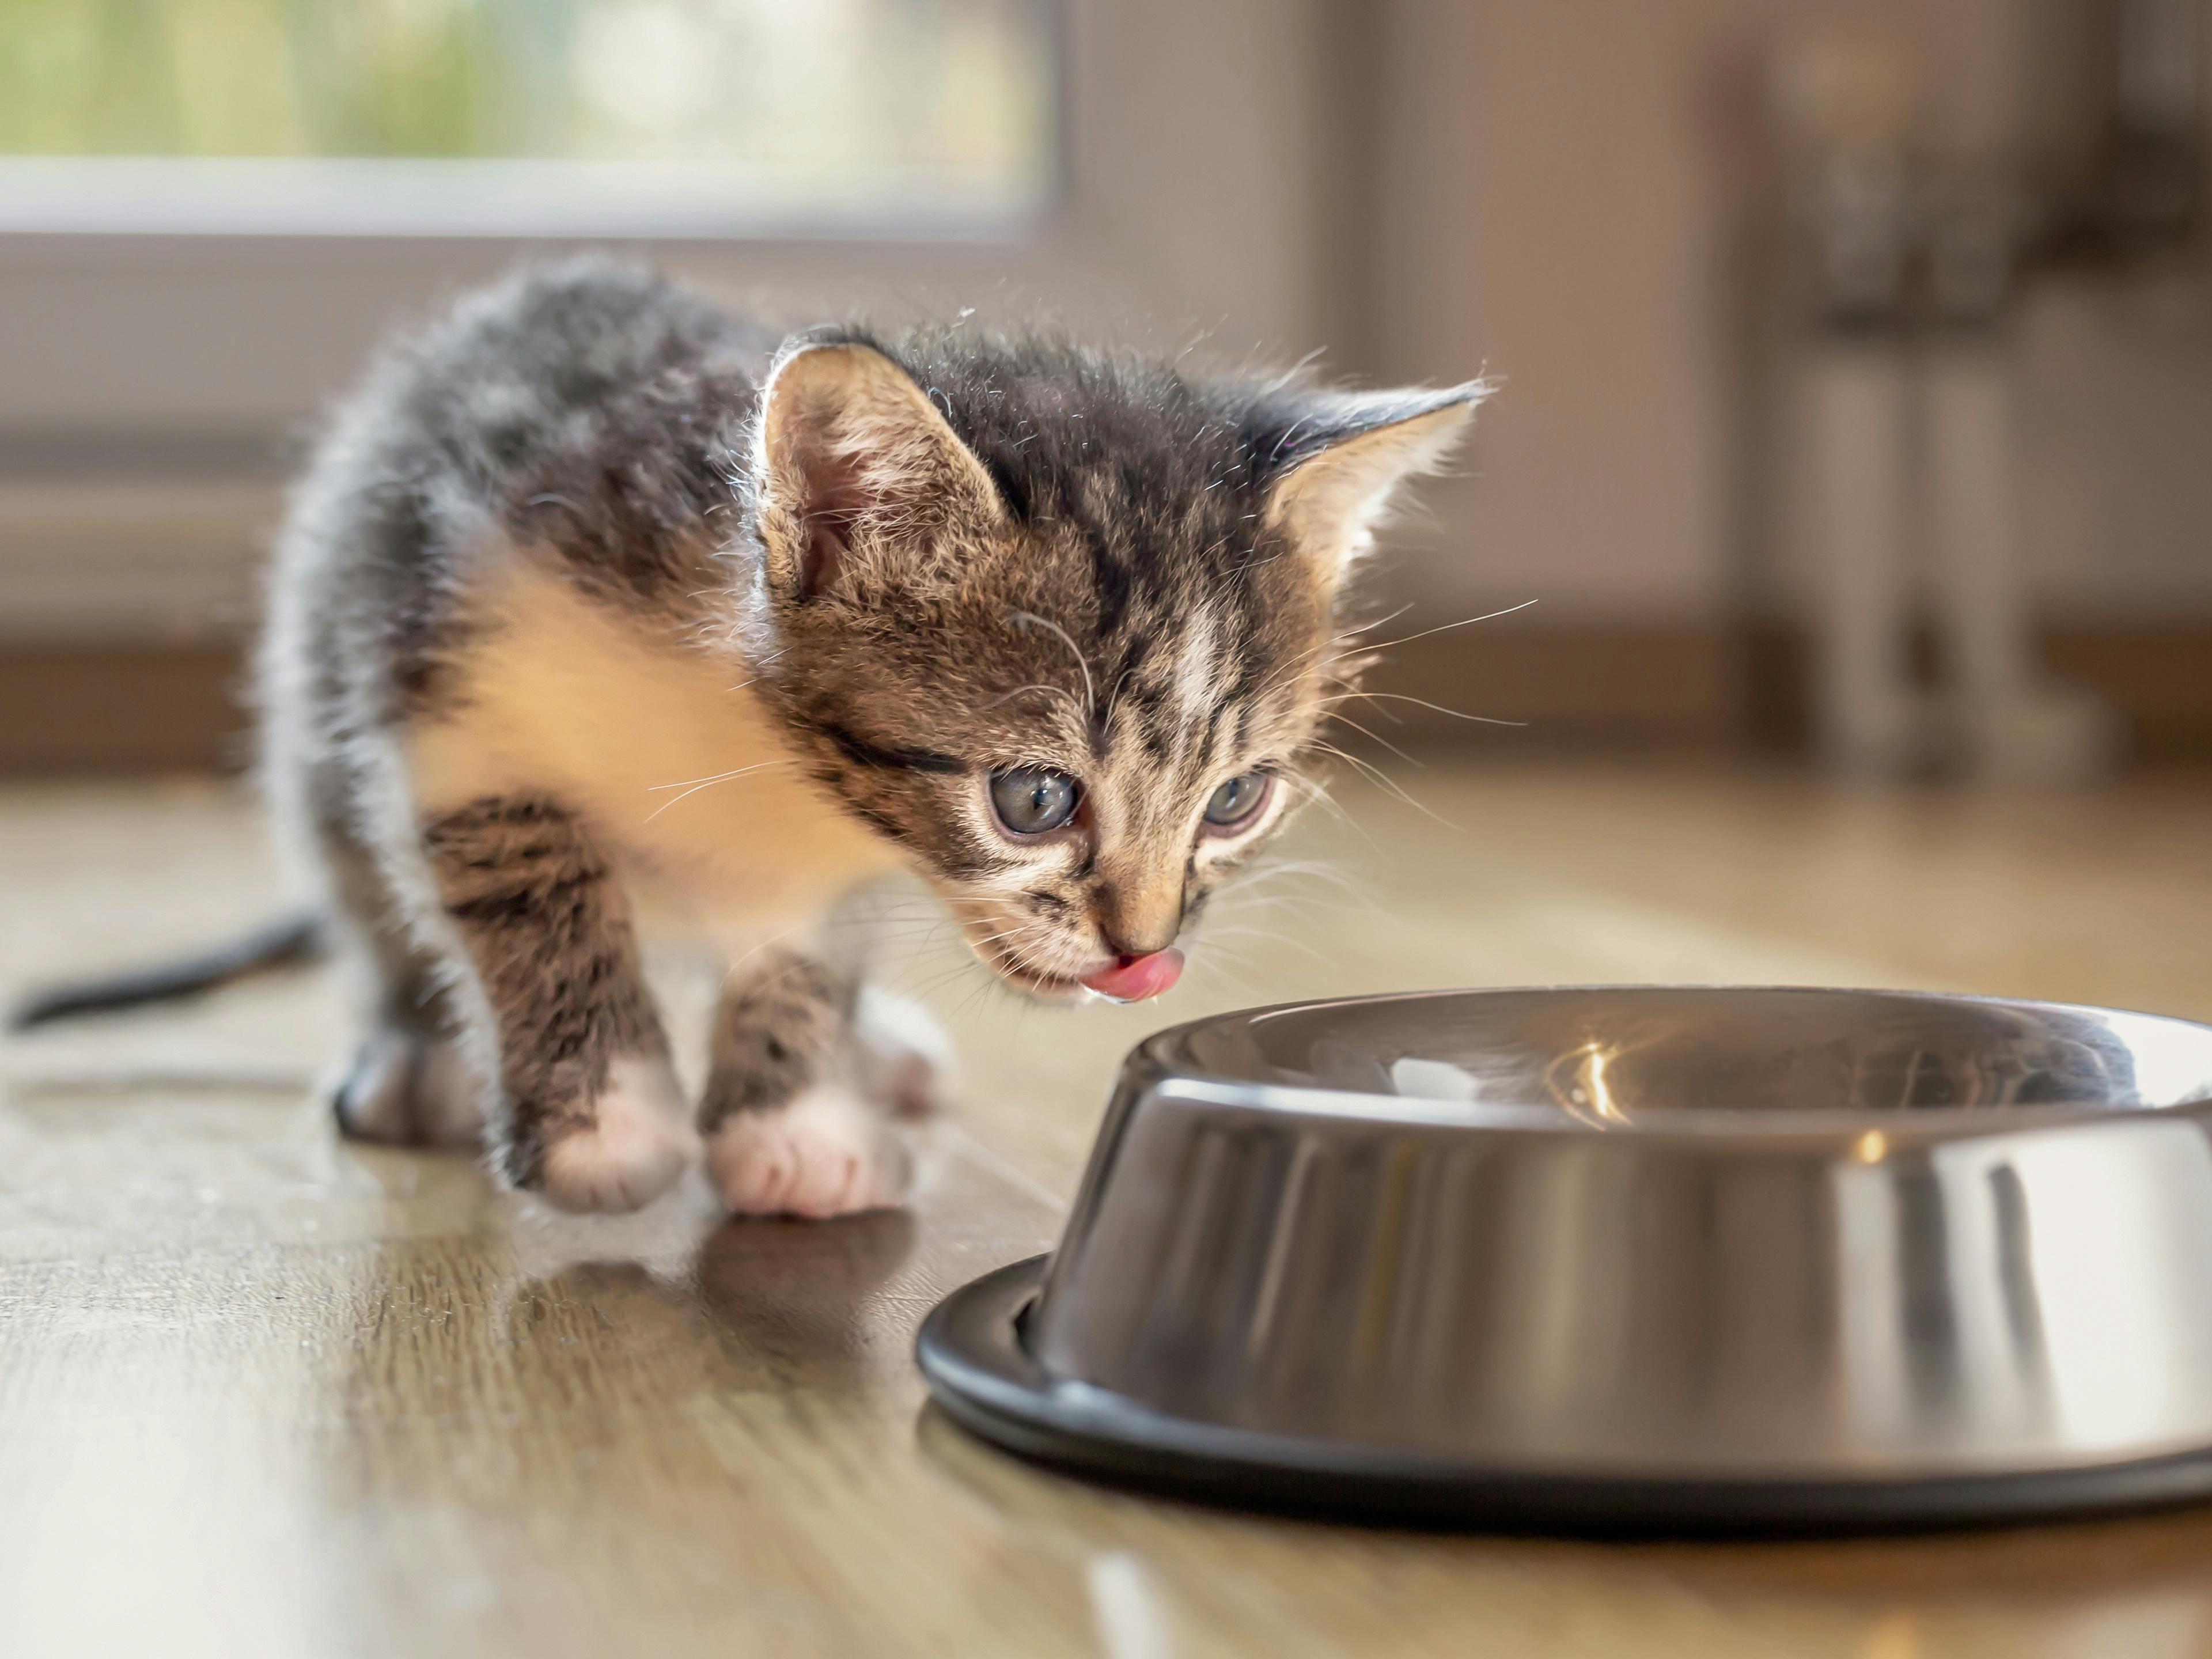 Grey kitten eating from a stainless steel feeding bowl